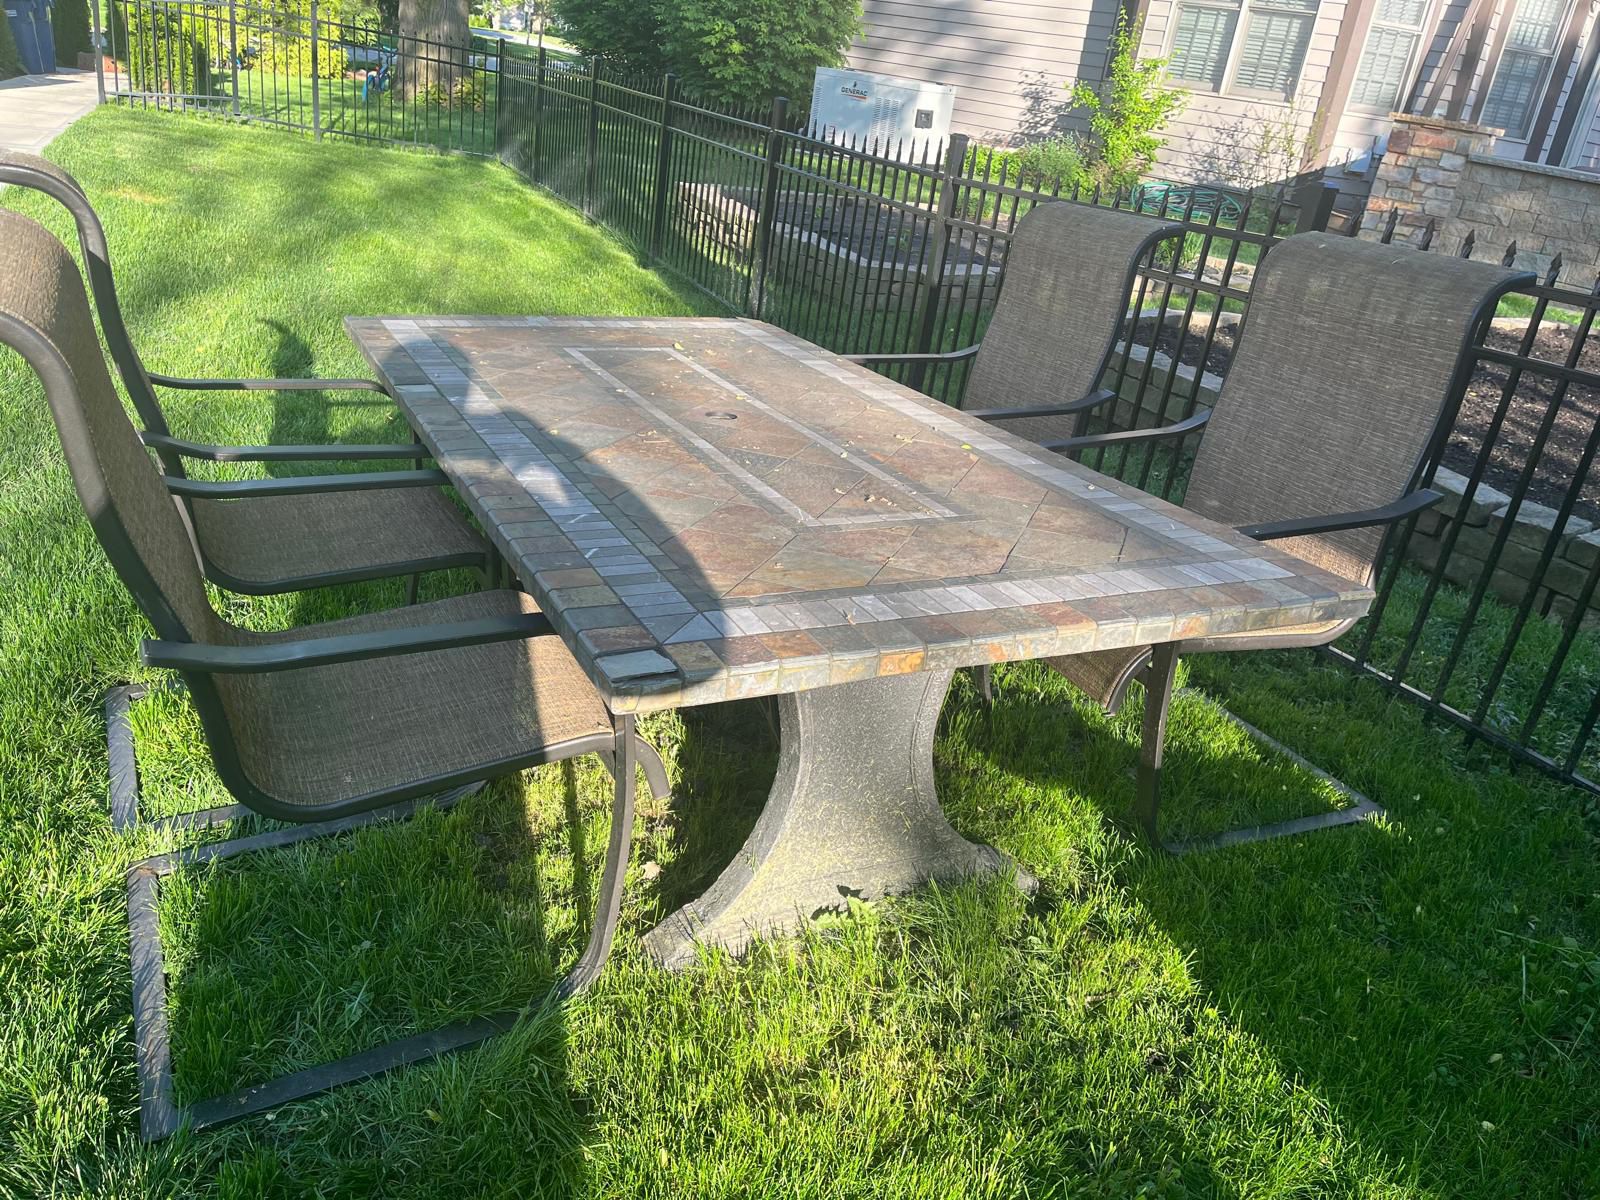 Outdoor Stone Top Table With 4 Chairs